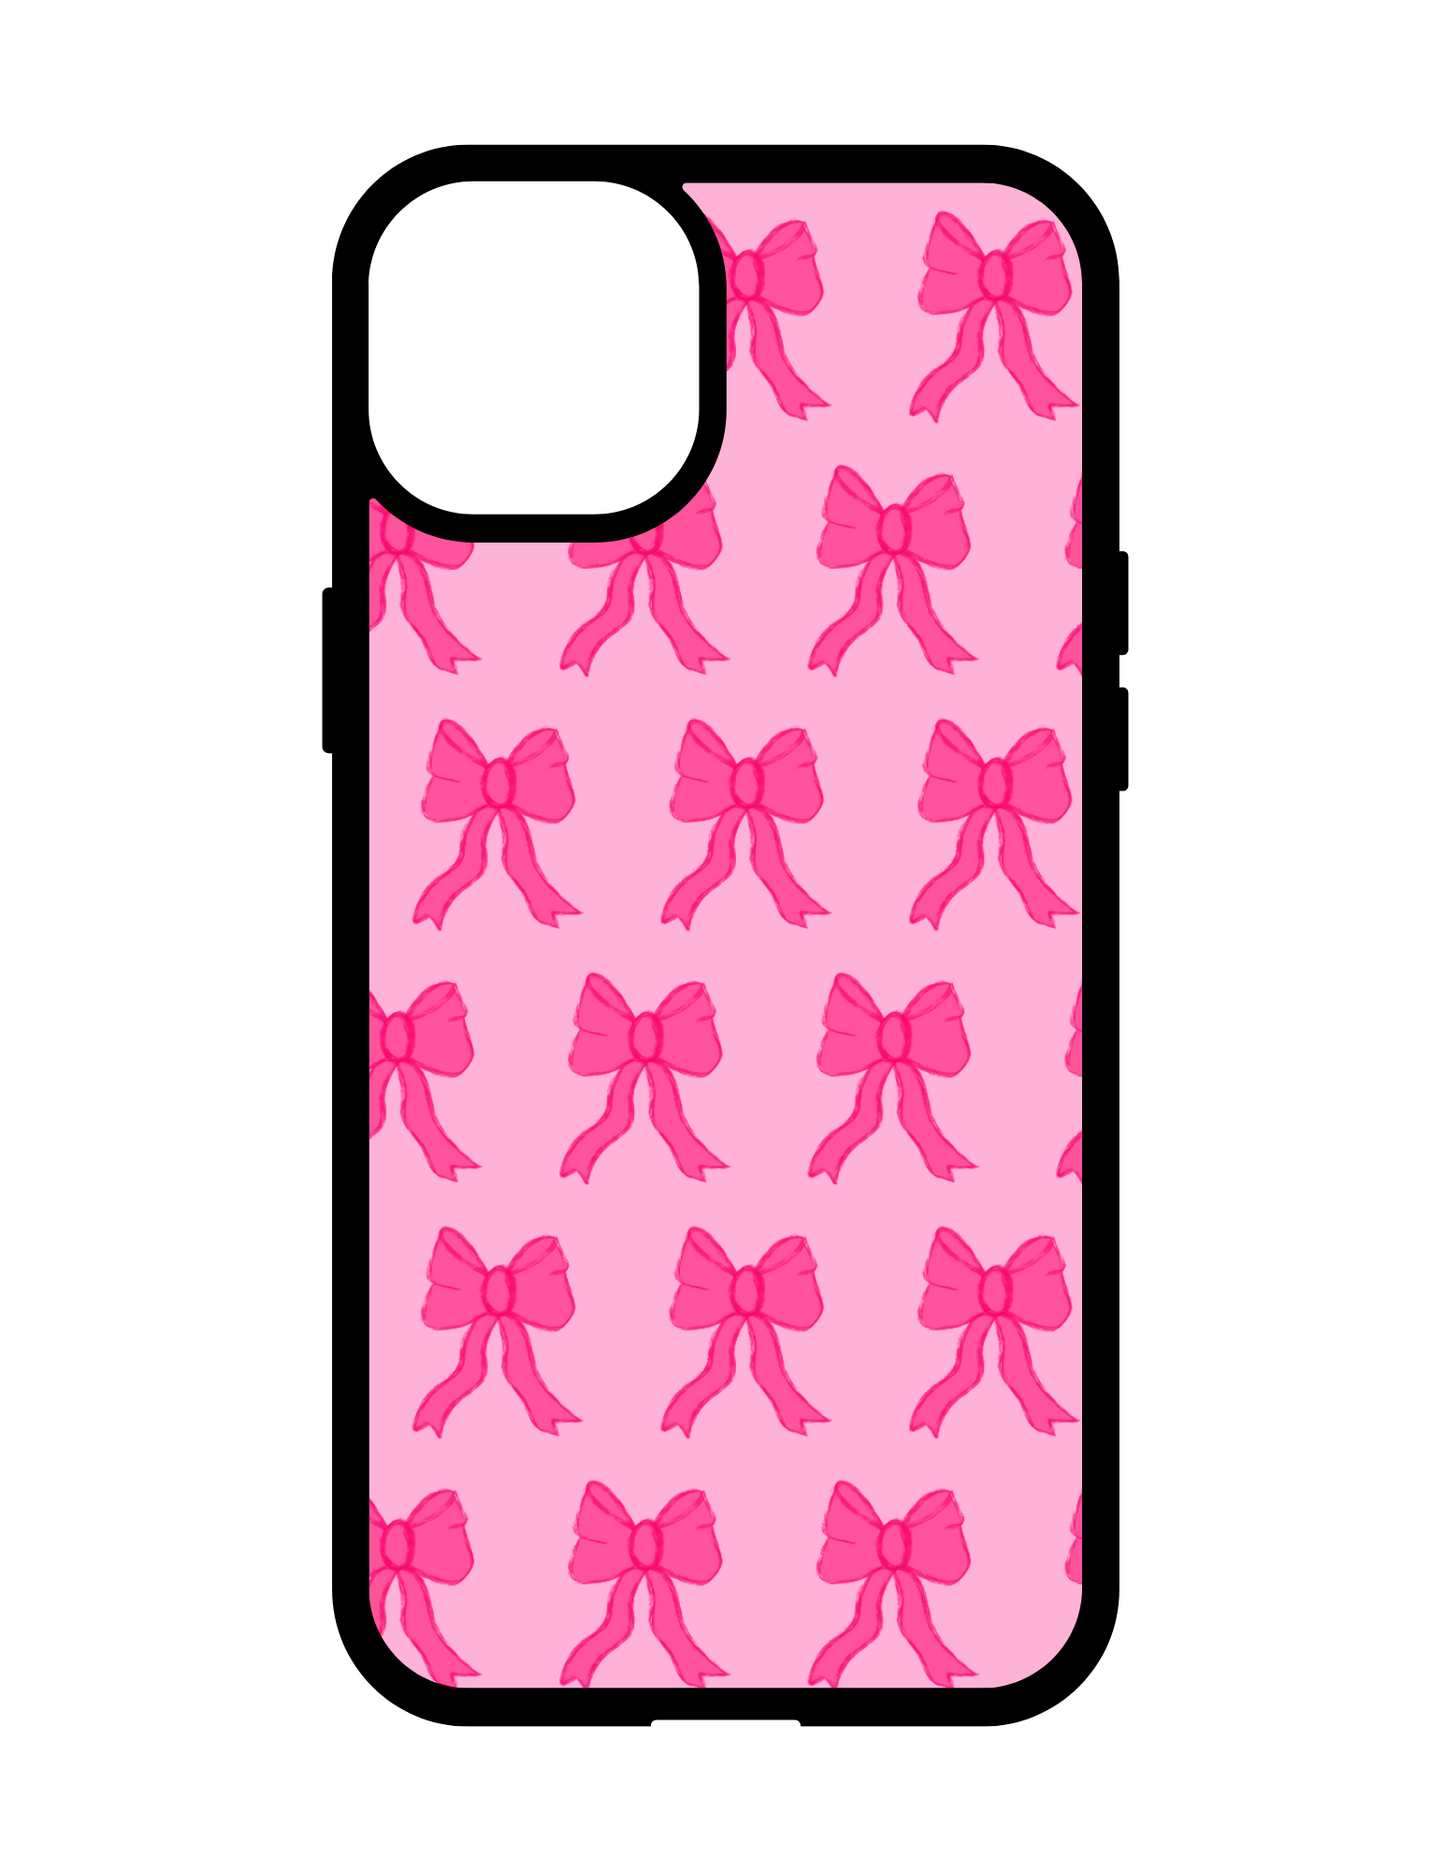 Pink Bows - iPhone Case